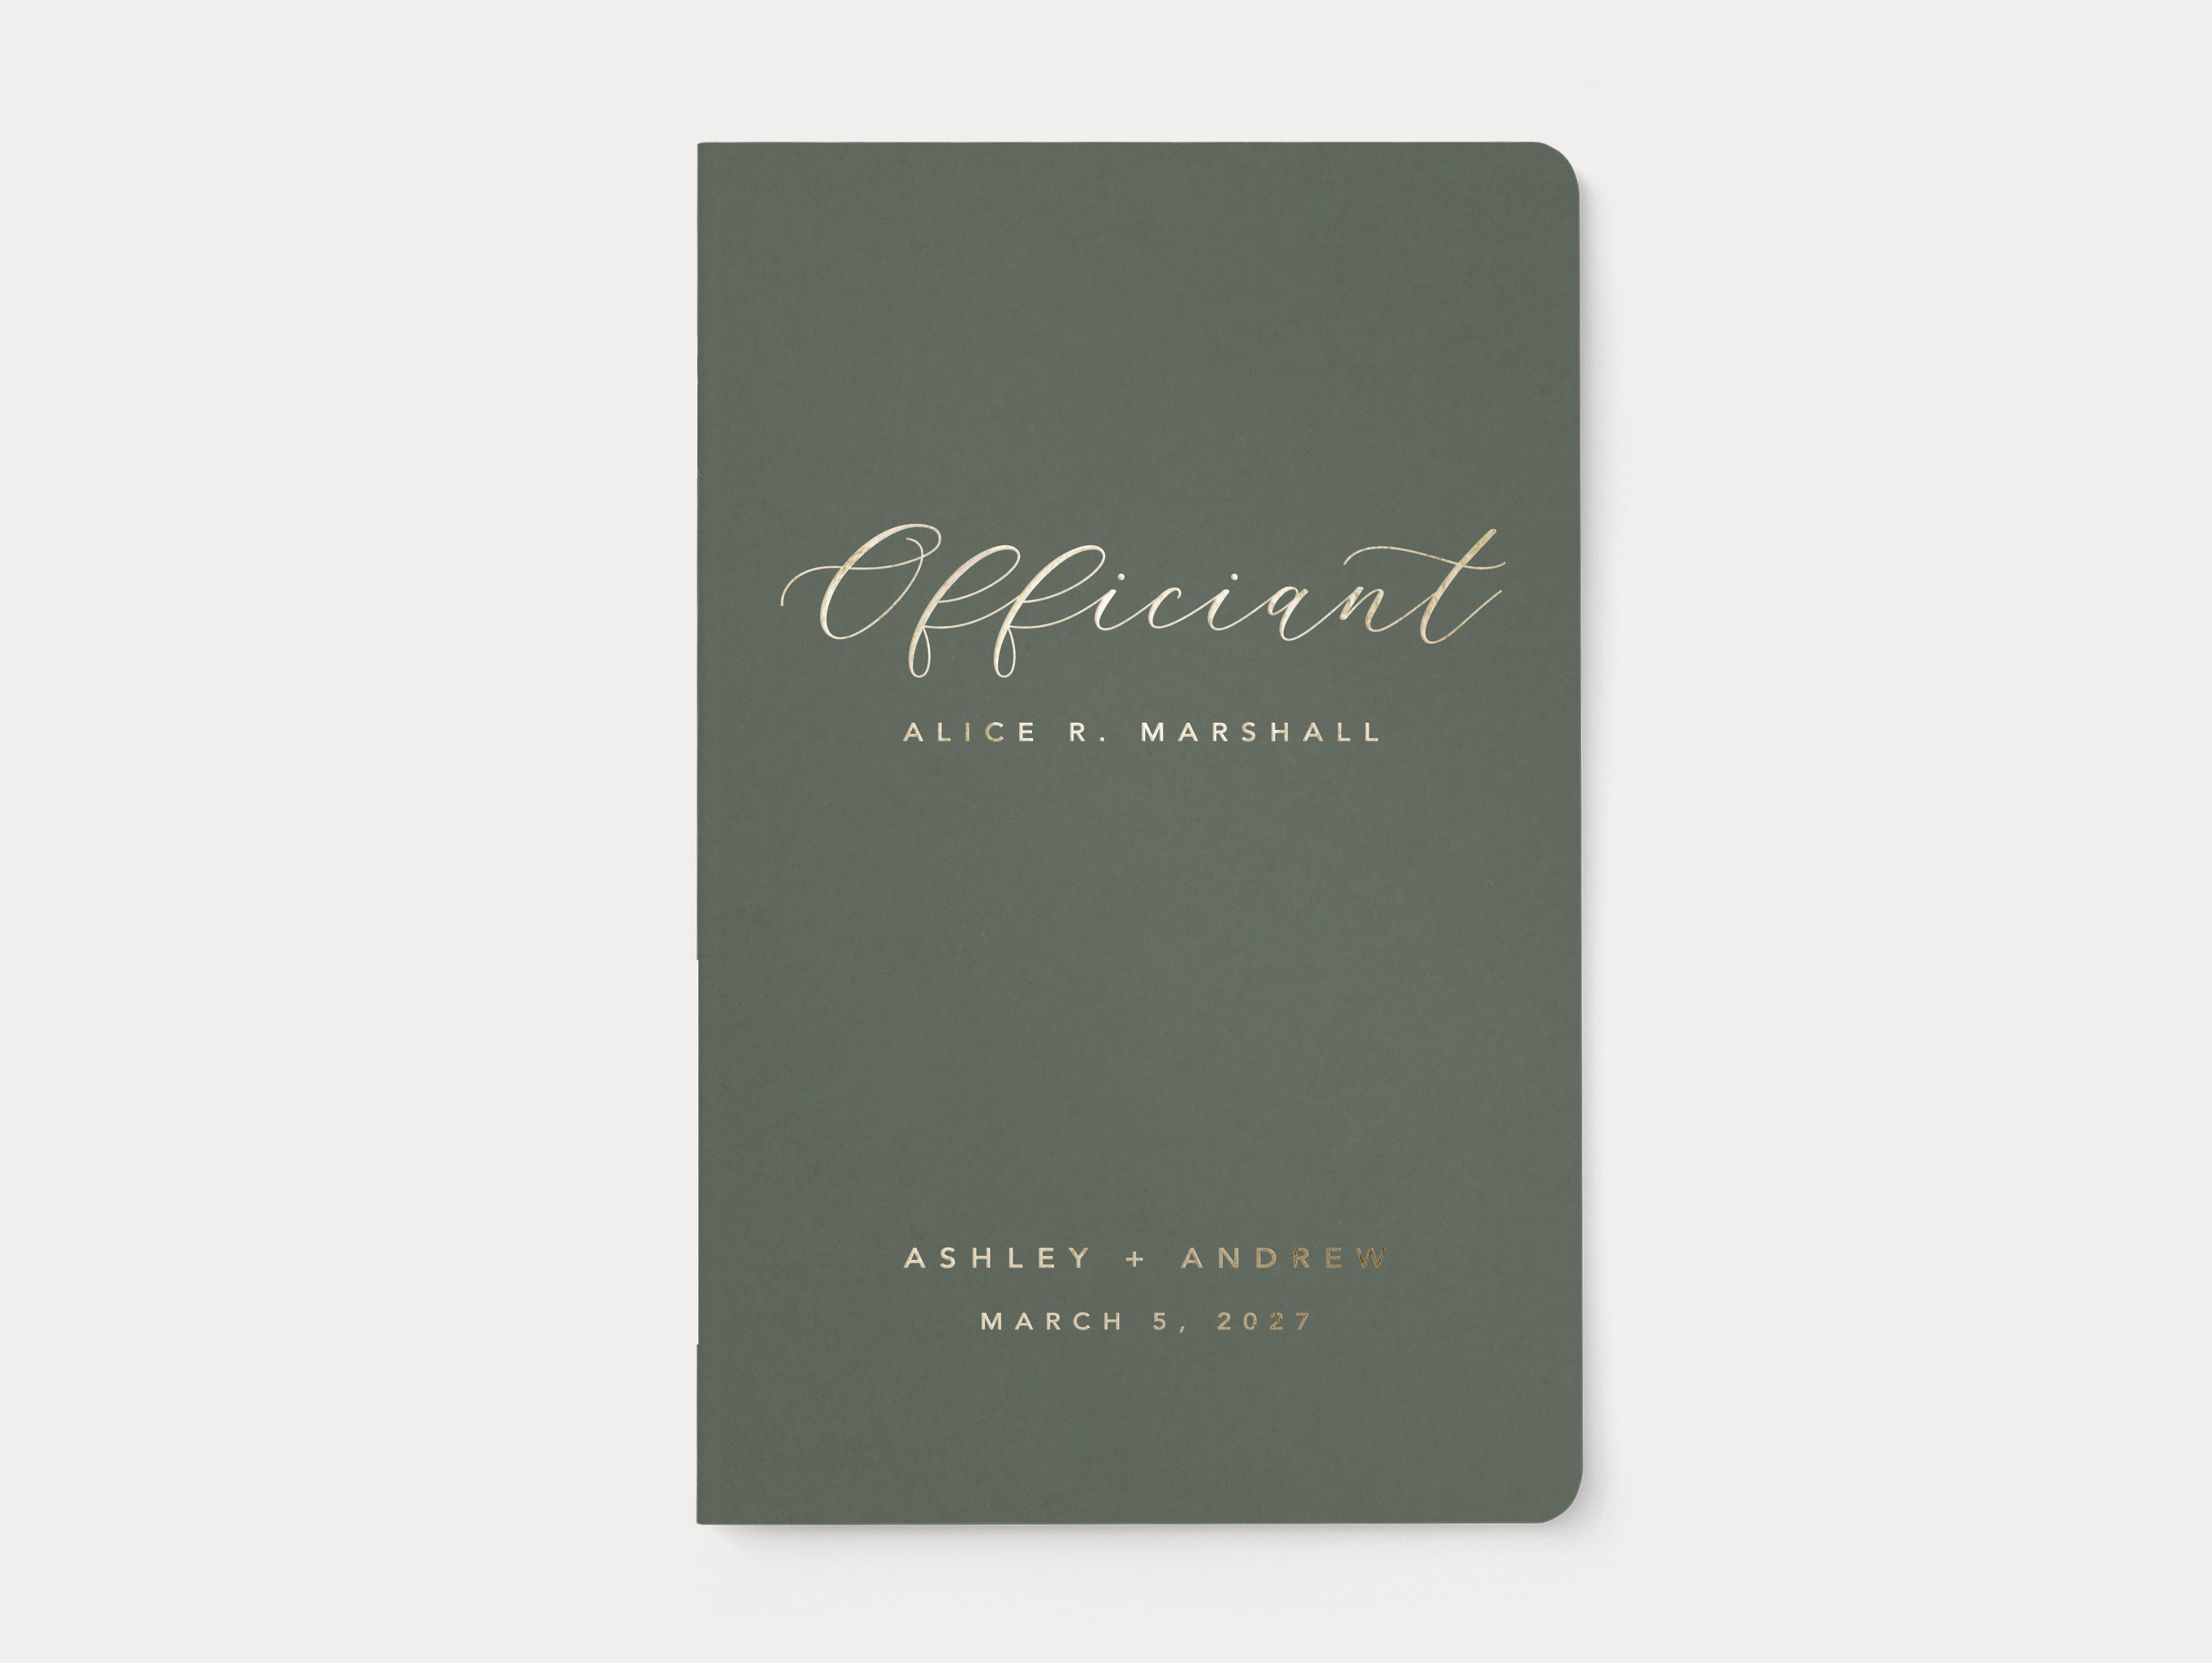 Custom officiant book for ceremony with gold foil.